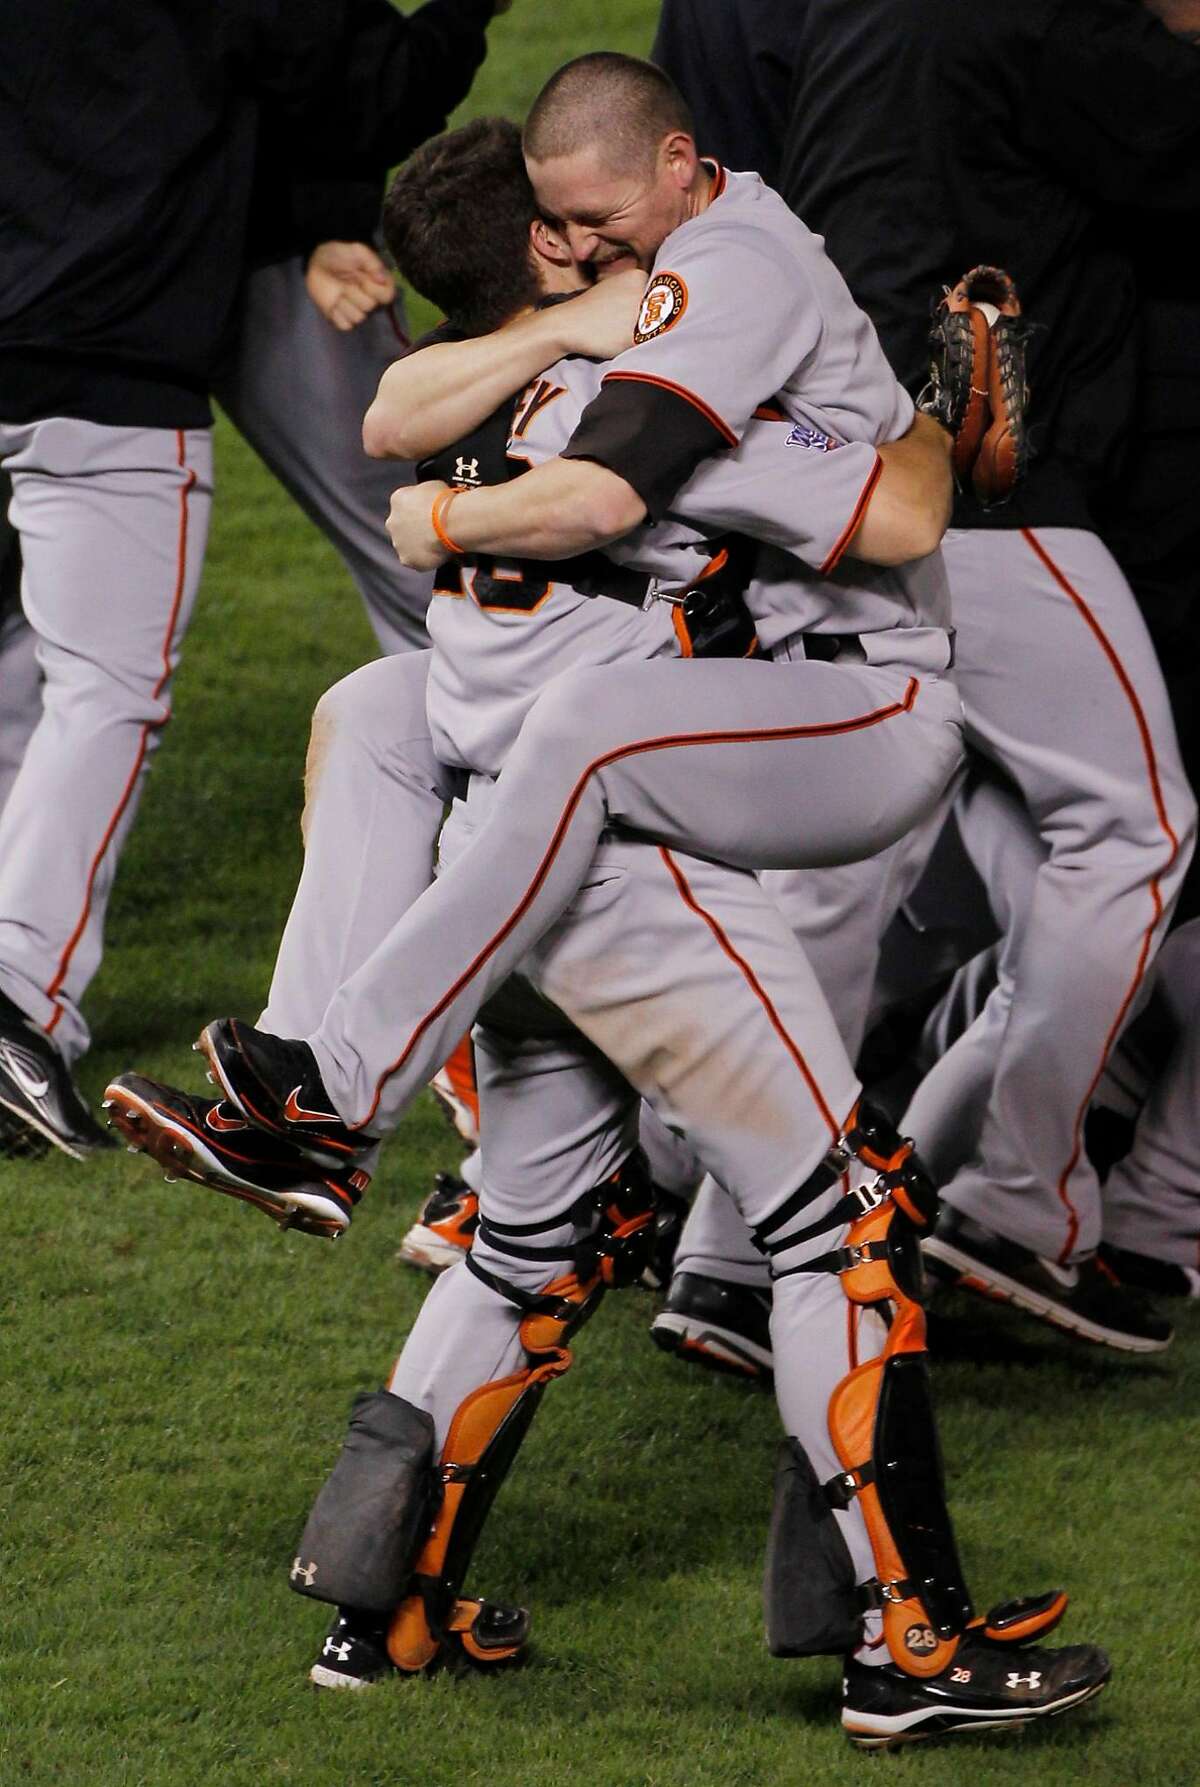 FILE - In this Nov. 1, 2010, file photo, San Francisco Giants Aubrey Huff hugs Buster Posey, left, after winning the World Series in Game 5 of baseball's World Series against the Texas Rangers in Arlington, Texas. How do the Giants find a way to win every other October. (AP Photo/Mark Humphrey, File)